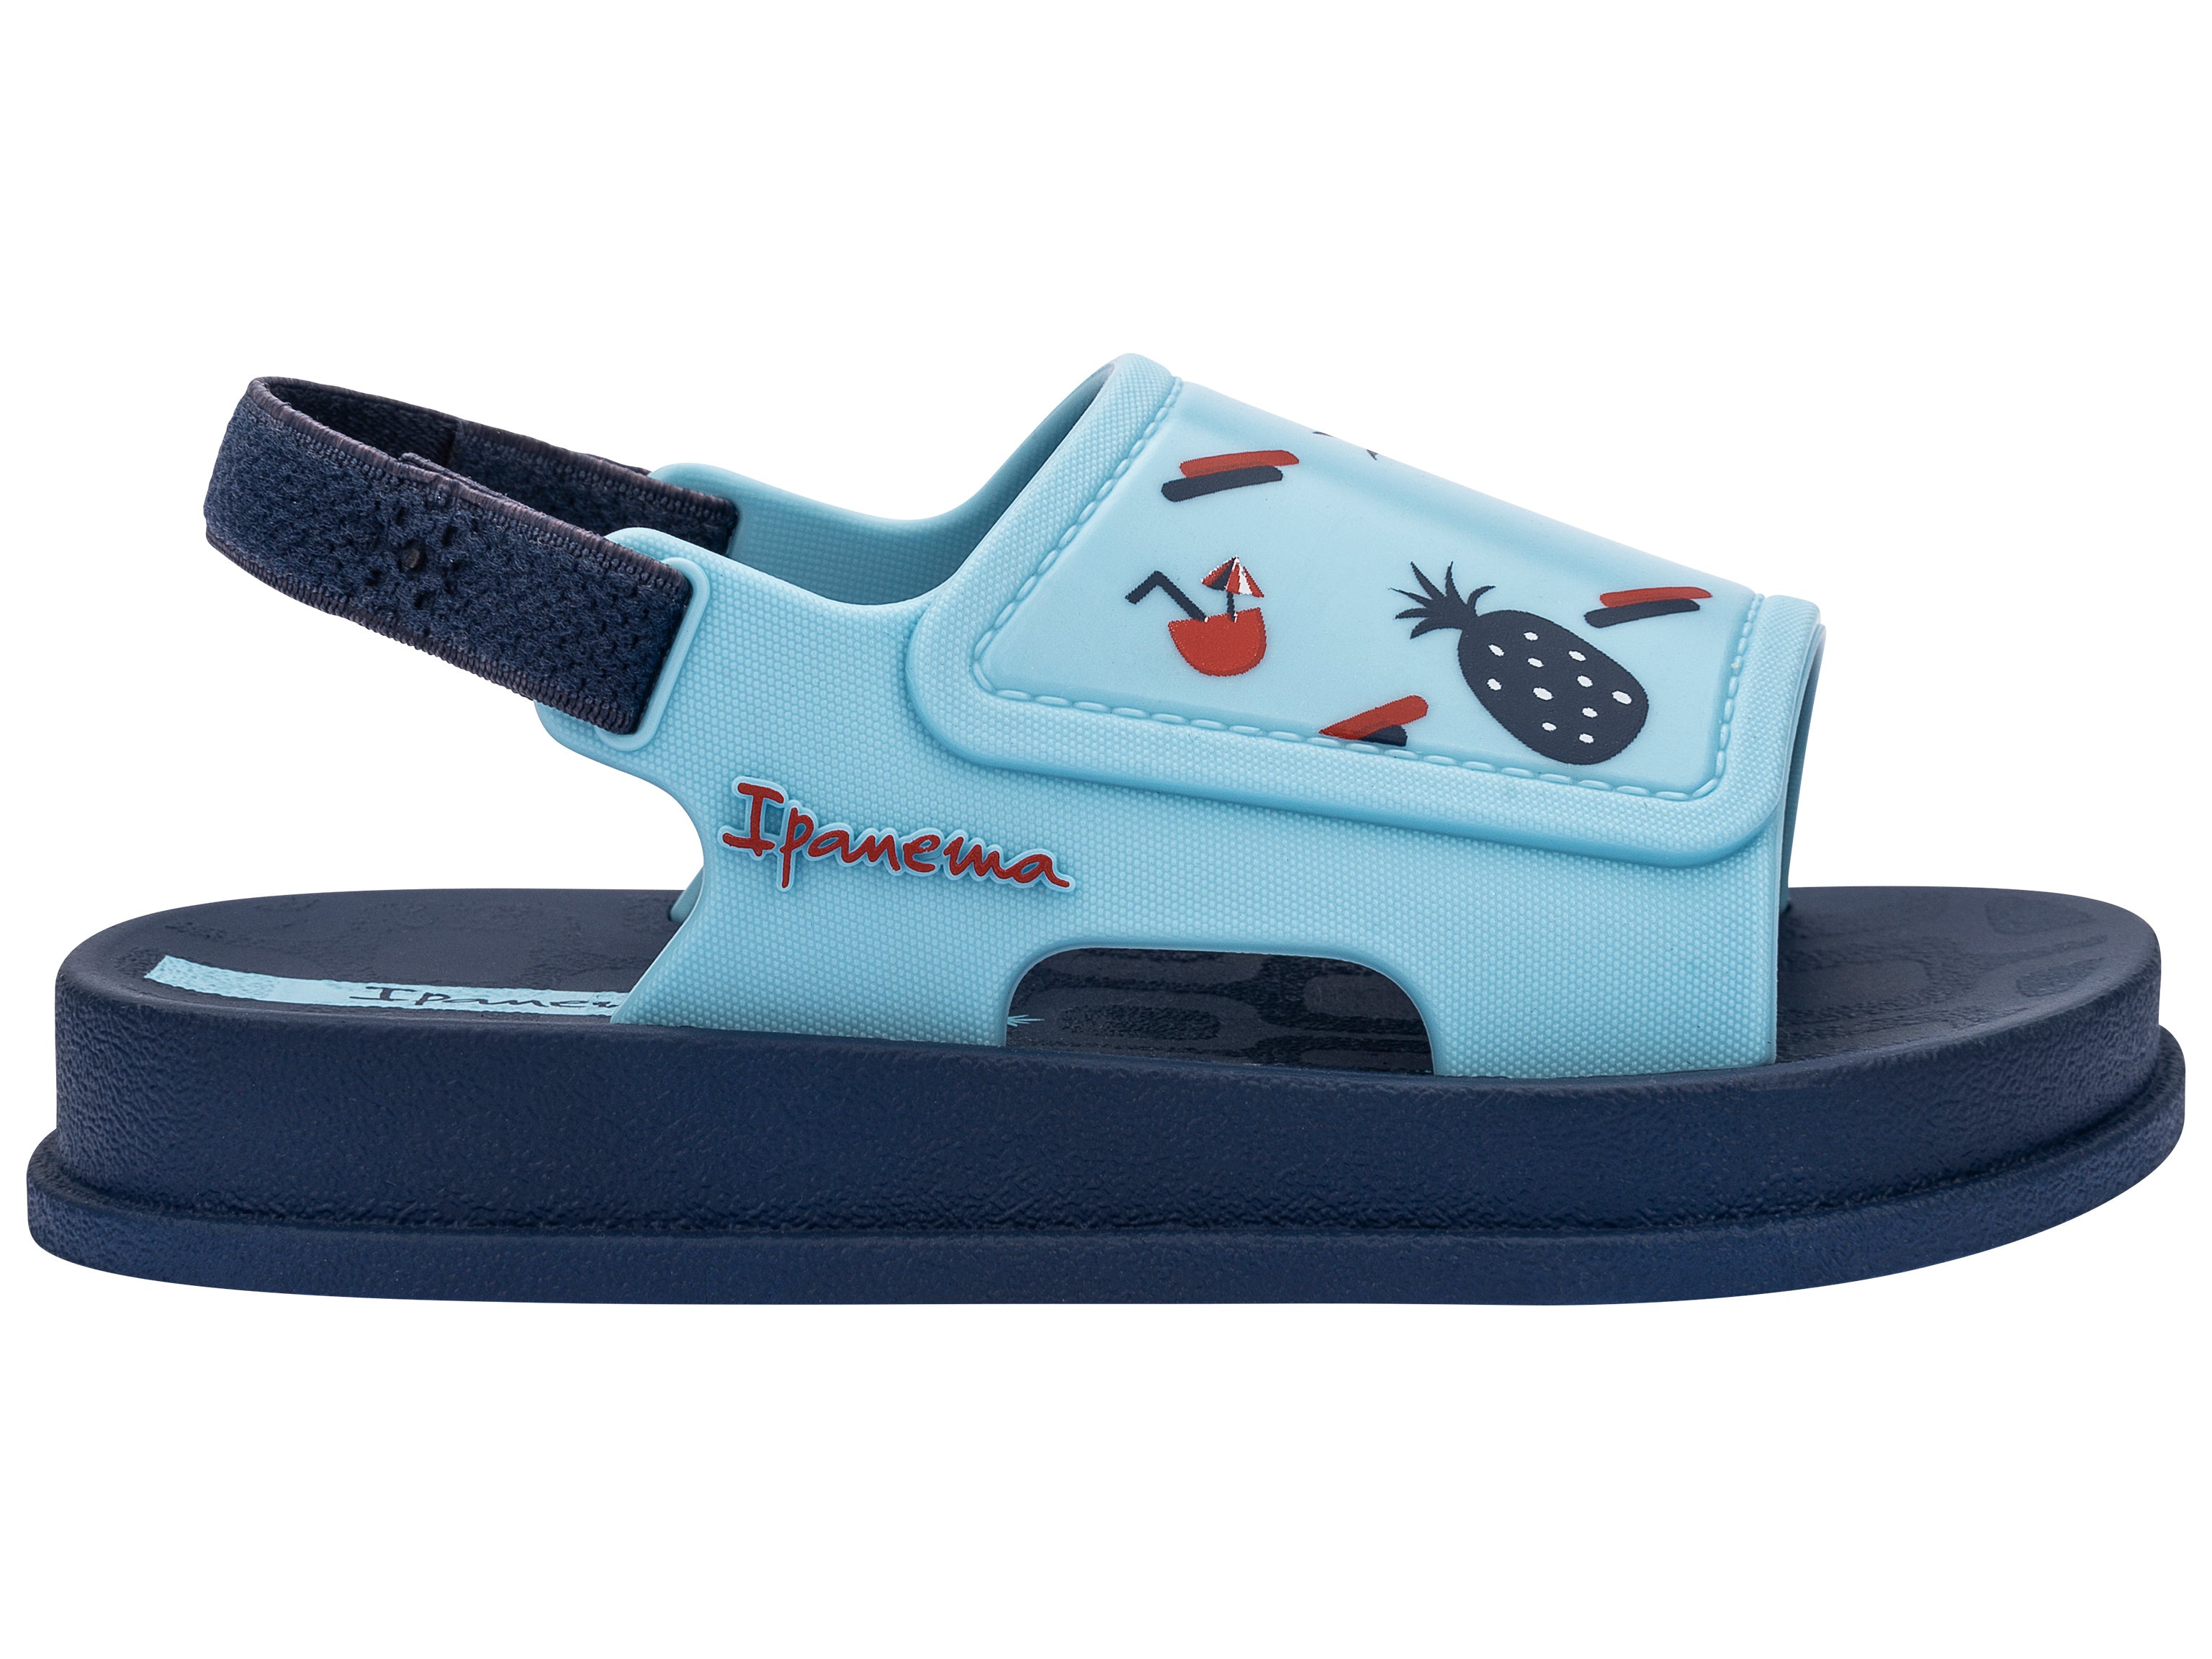 Outer side view of a blue Ipanema Soft baby sandal with fruit print on the upper.